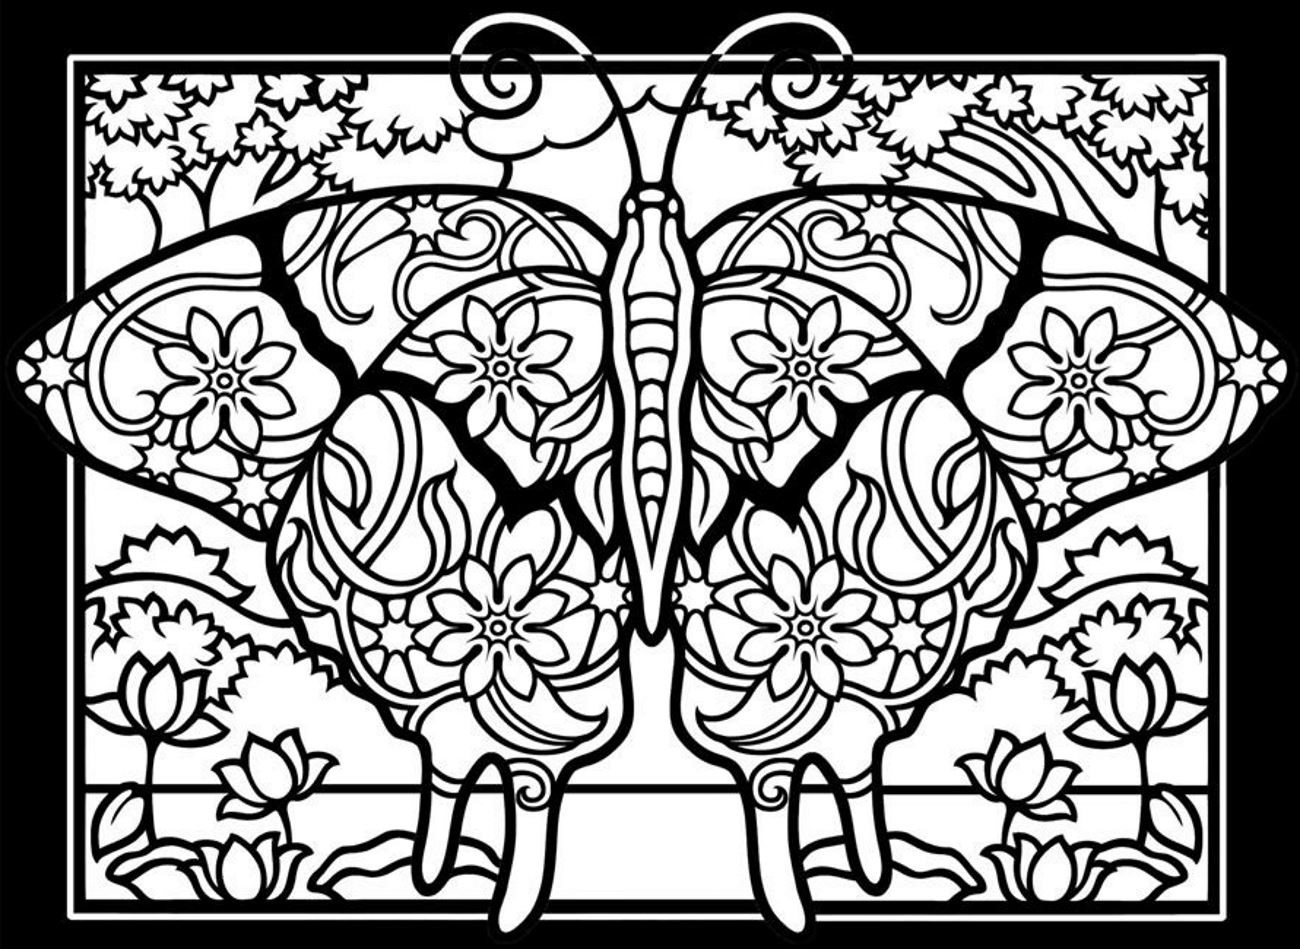 Coloring picture of a beautiful butterfly with black & thick border